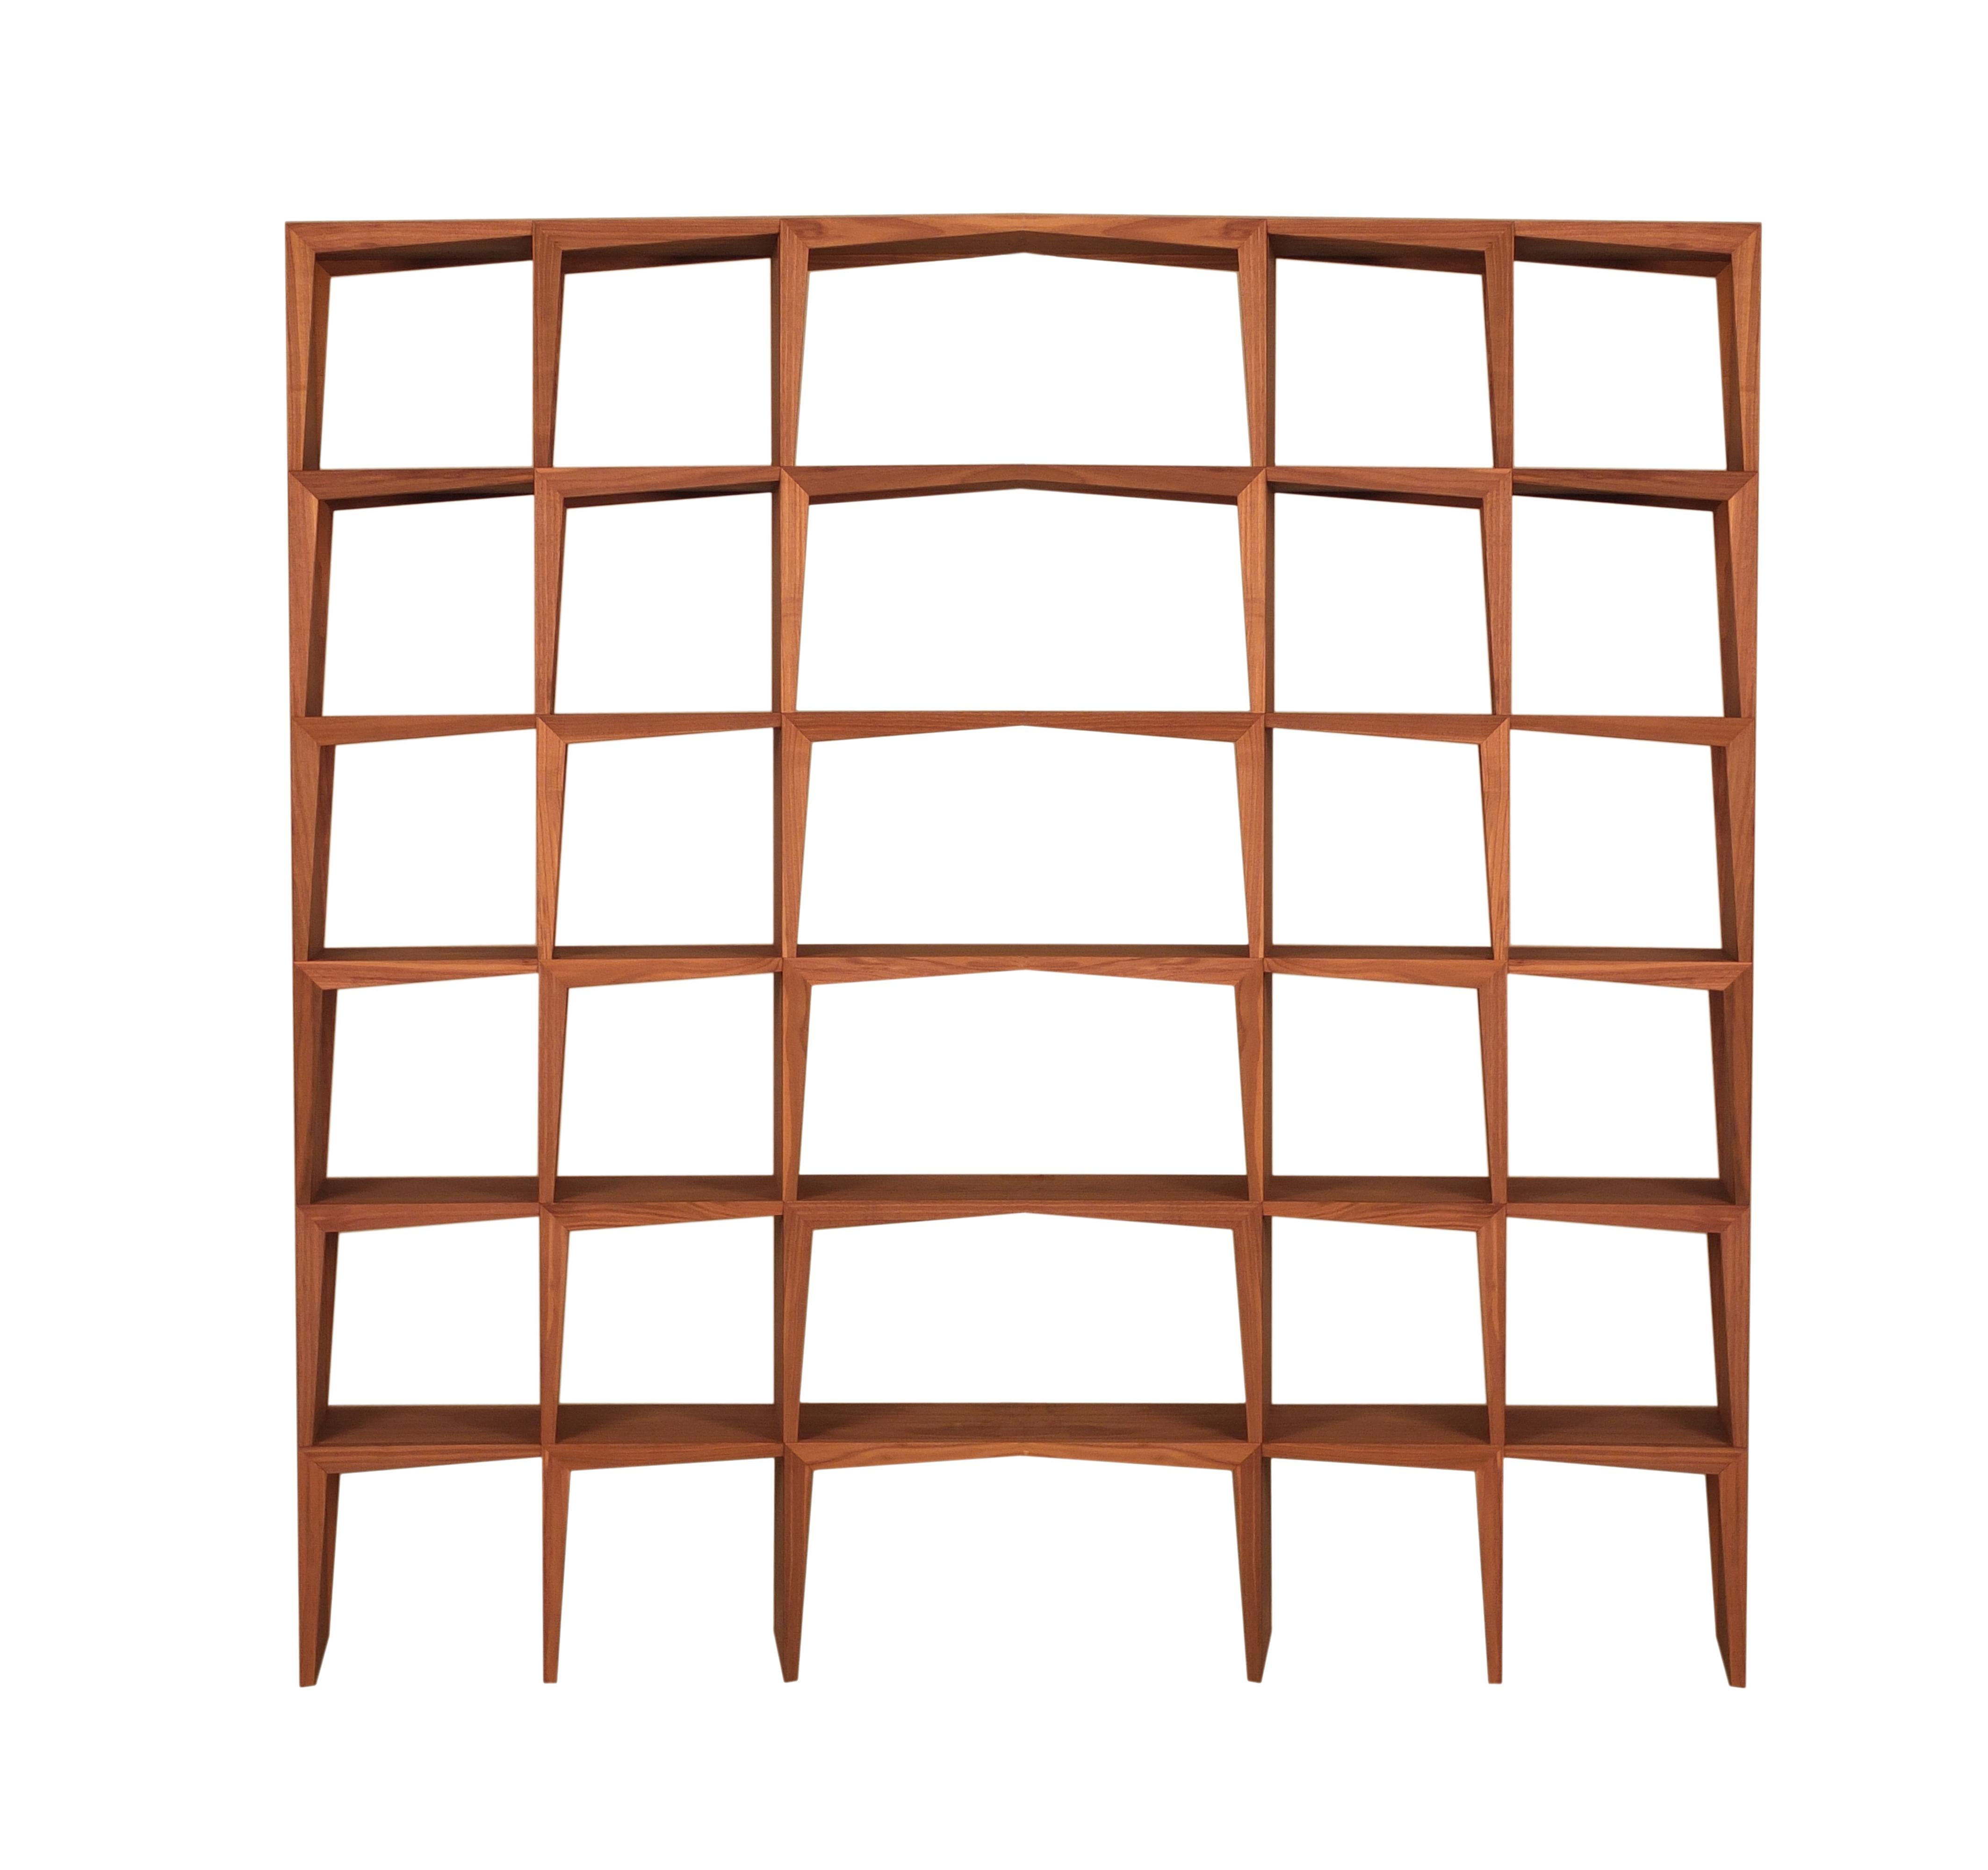 Contemporary Kant, Freestanding Bookshelf Made of Canaletto Walnut Wood, by Morelato